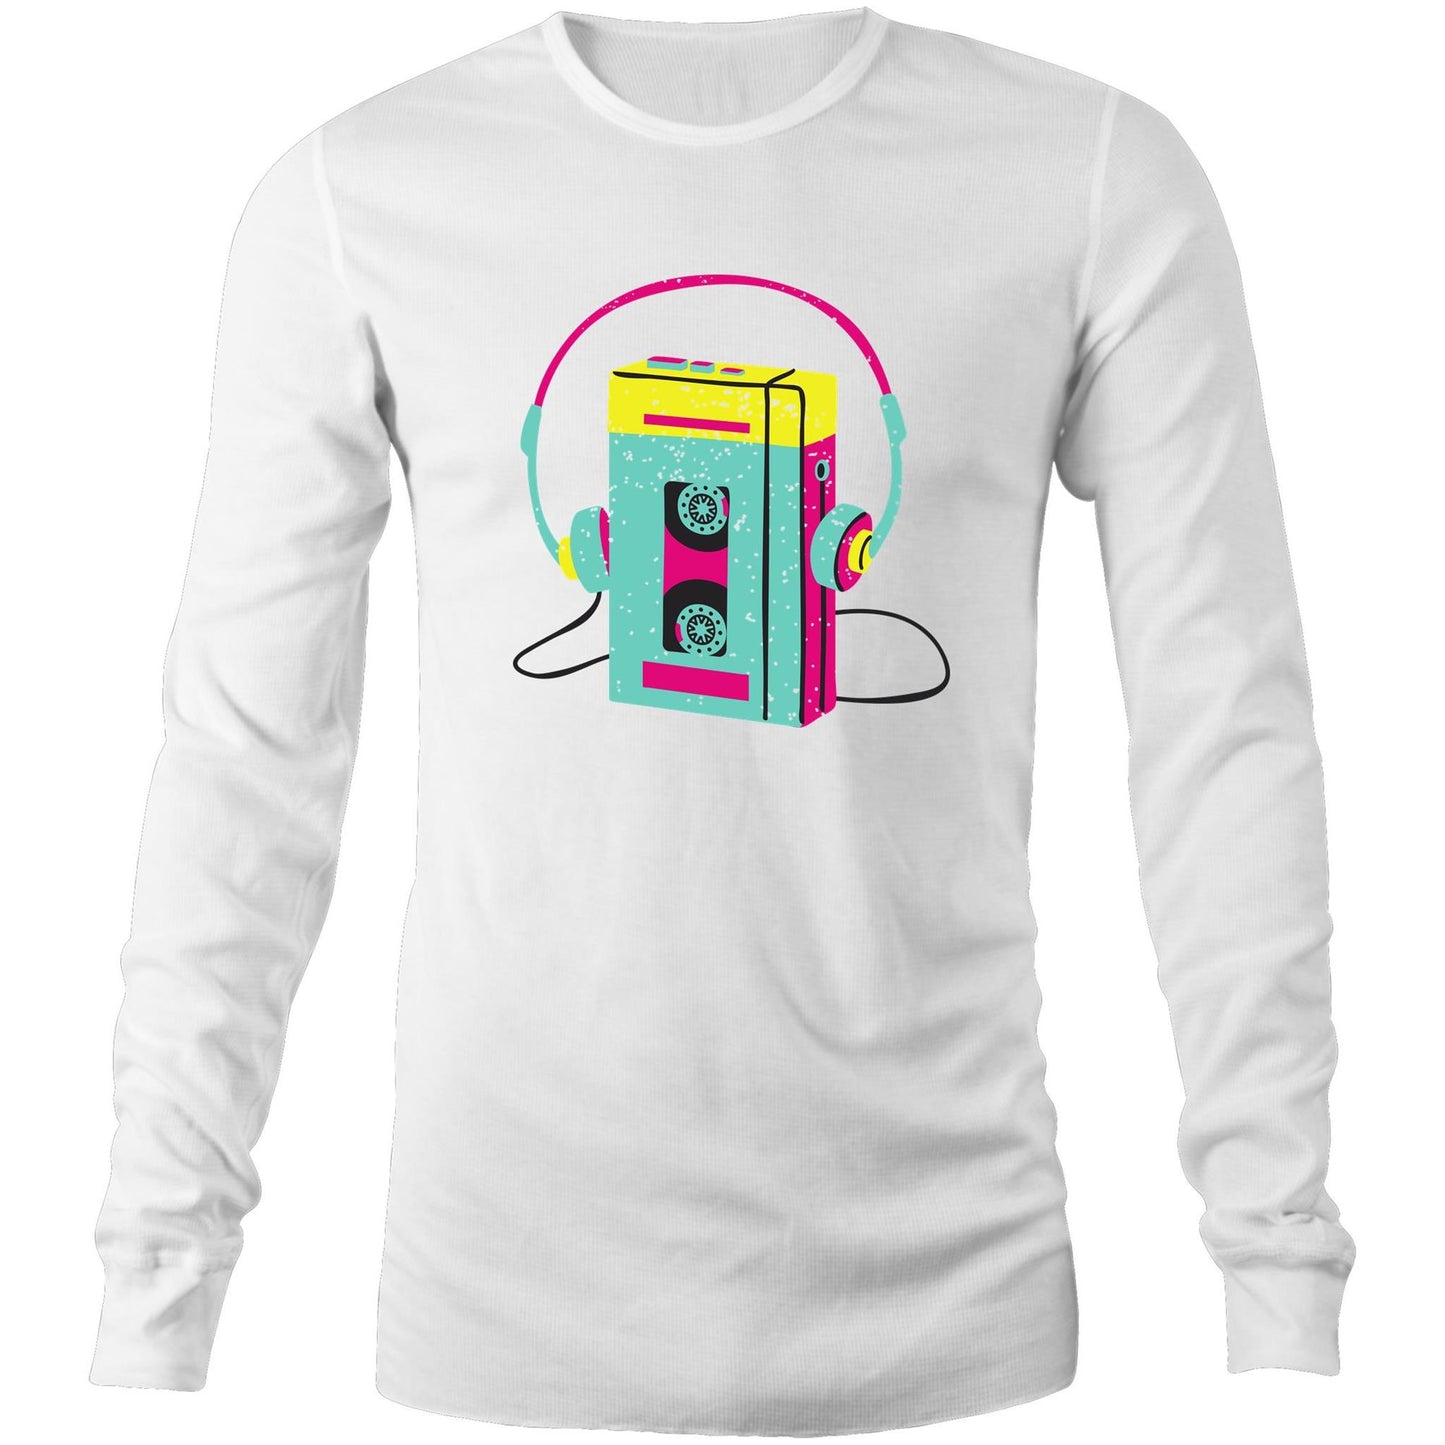 Wired For Sound, Music Player - Long Sleeve T-Shirt White Unisex Long Sleeve T-shirt Mens Music Retro Womens